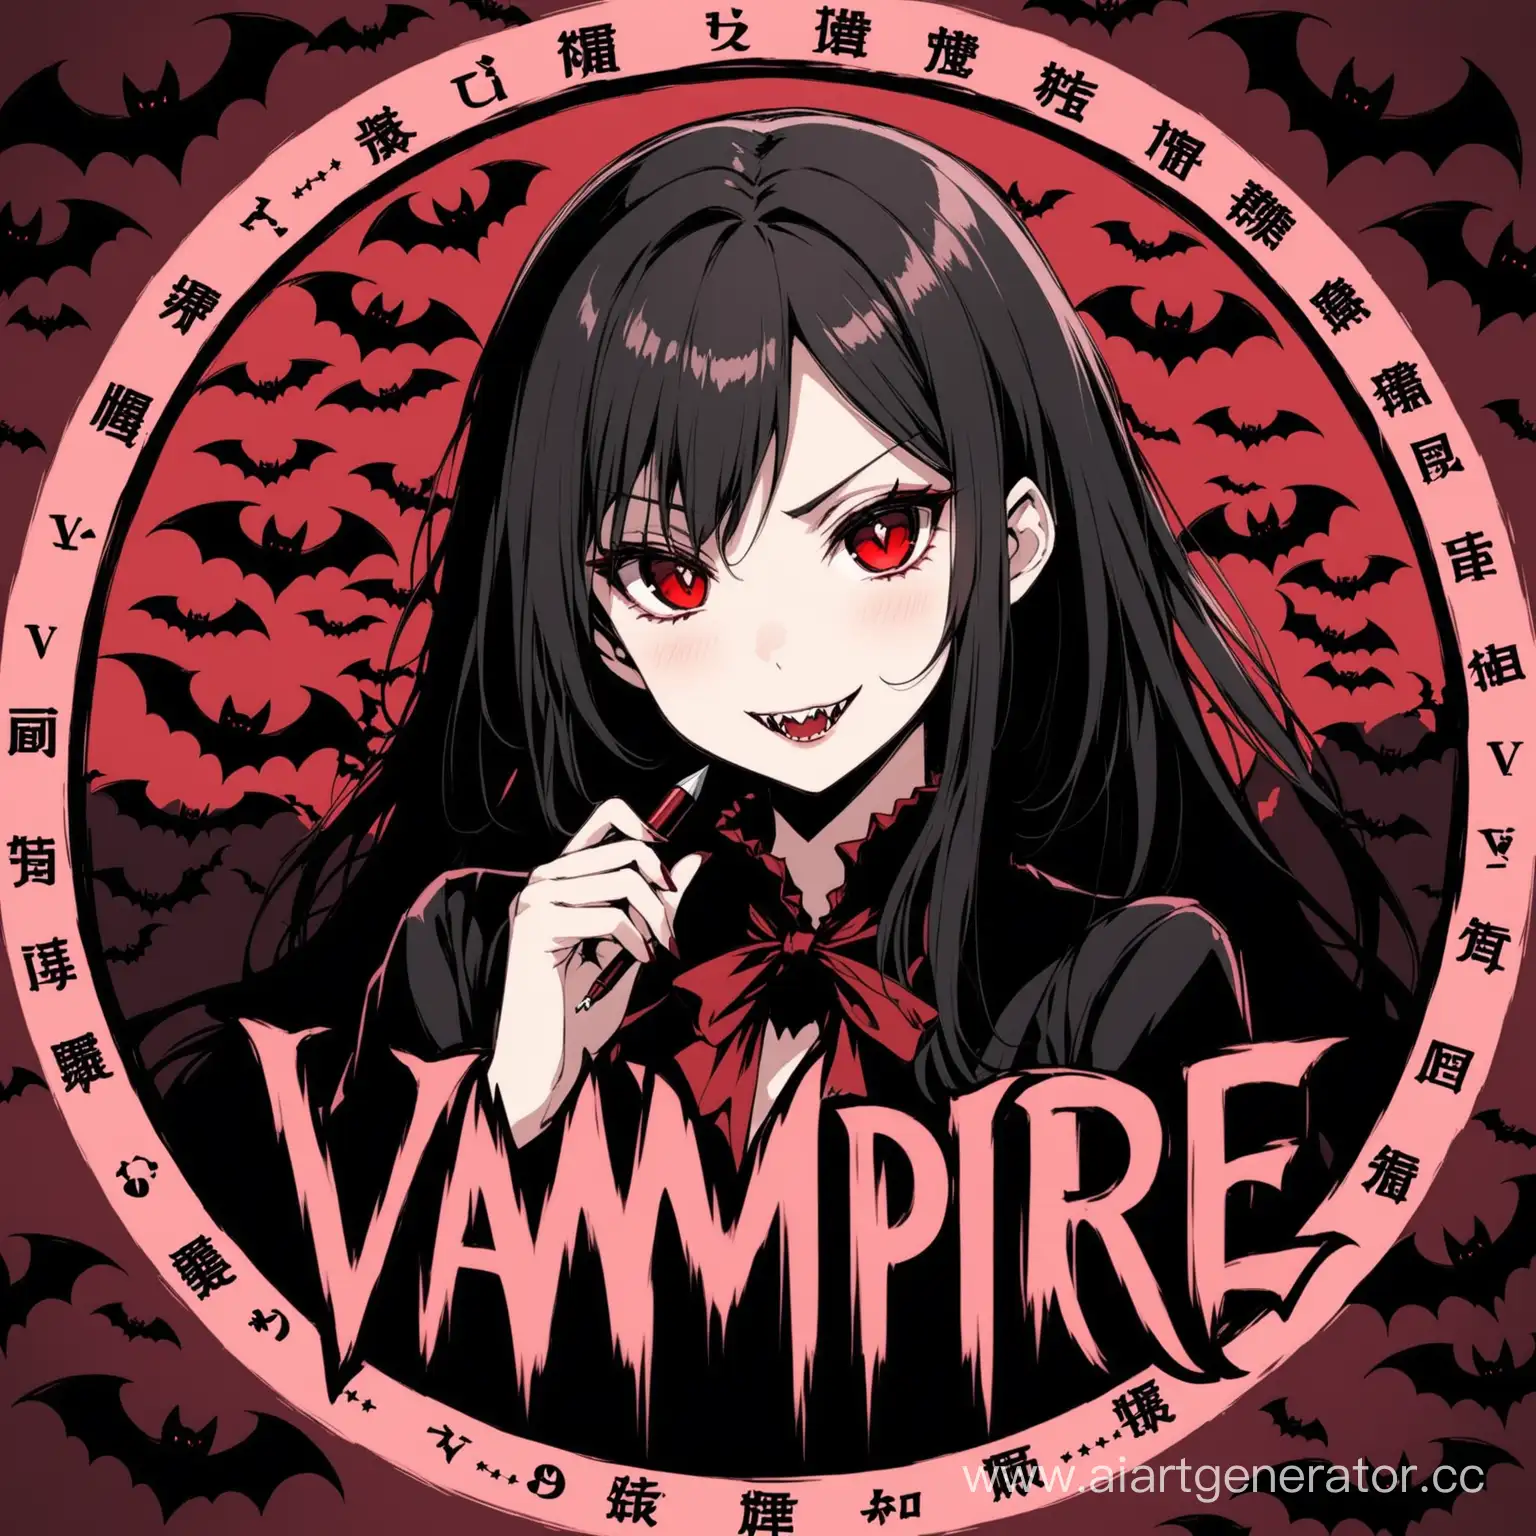 Mysterious-Anime-Vampire-Woman-Surrounded-by-Bats-with-VV83-Inscription